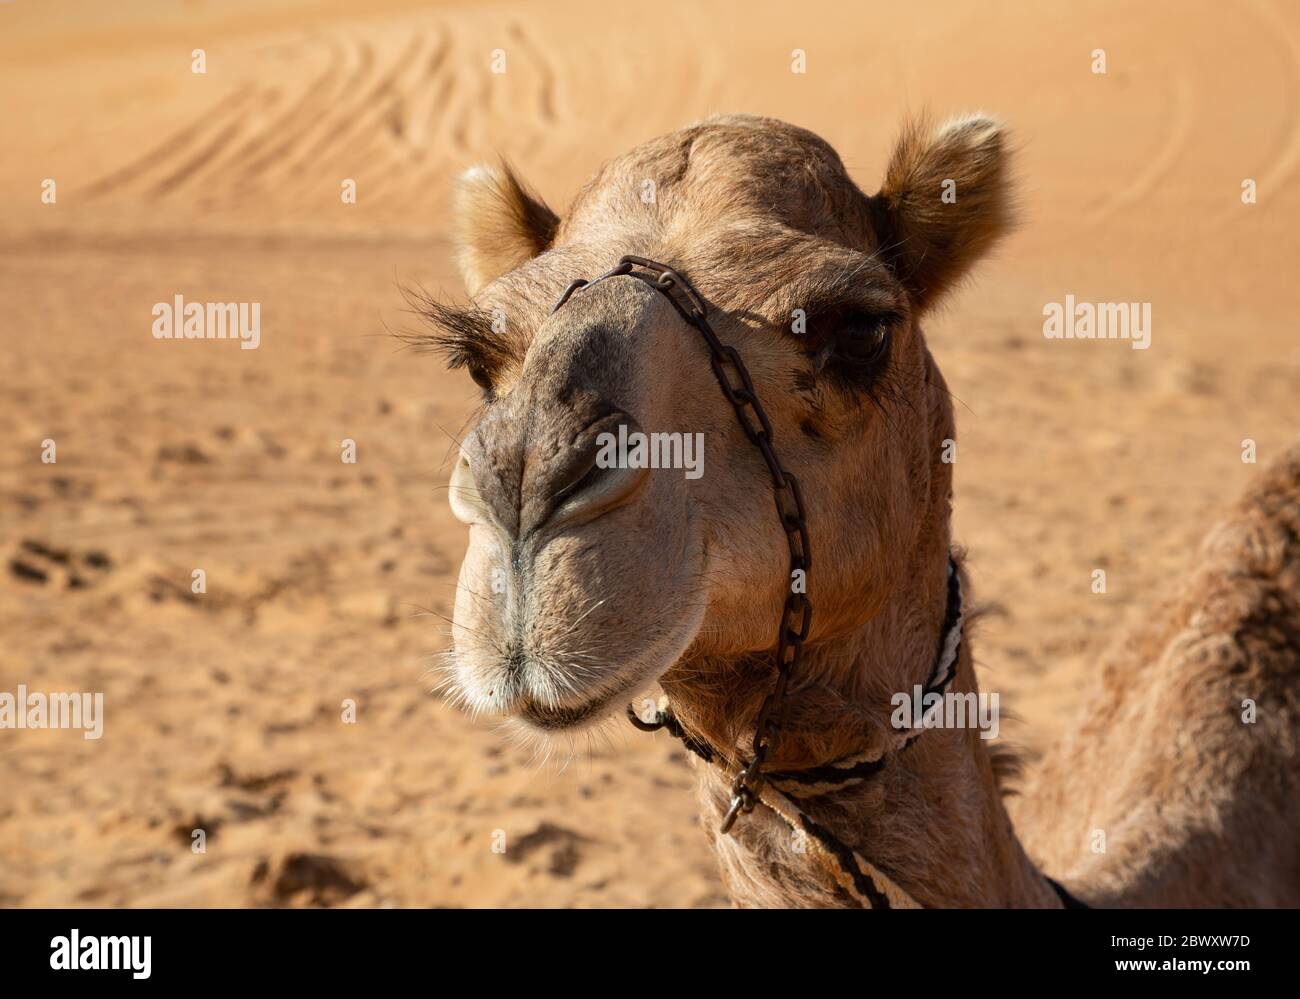 Portrait of a dromedary camel in Oman's Wahiba Sands desert featuring long eye lashes Stock Photo